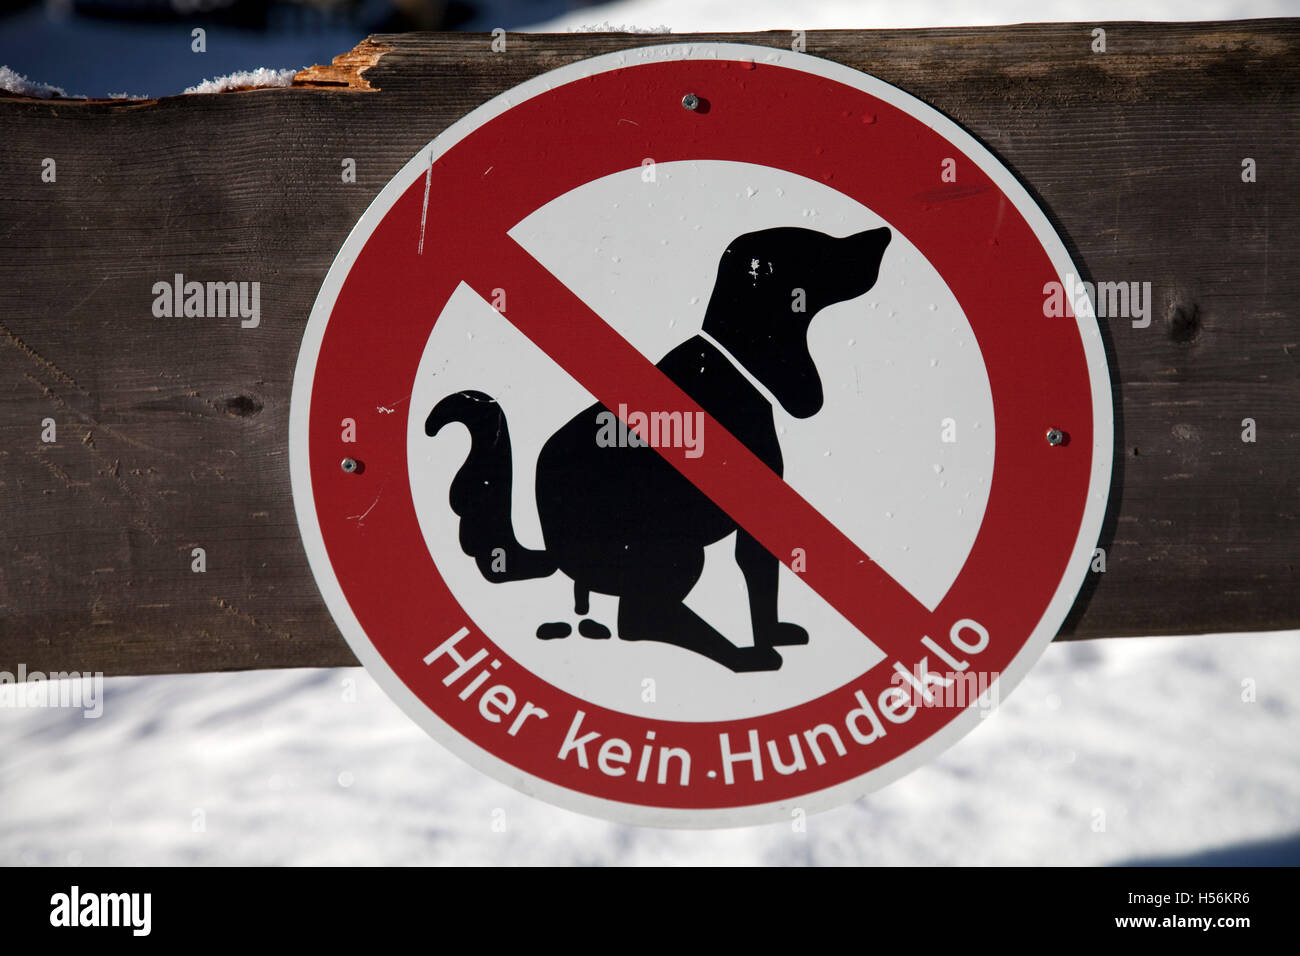 Prohibition sign, Hier kein Hundeklo, German for not a bog's toilet Stock Photo